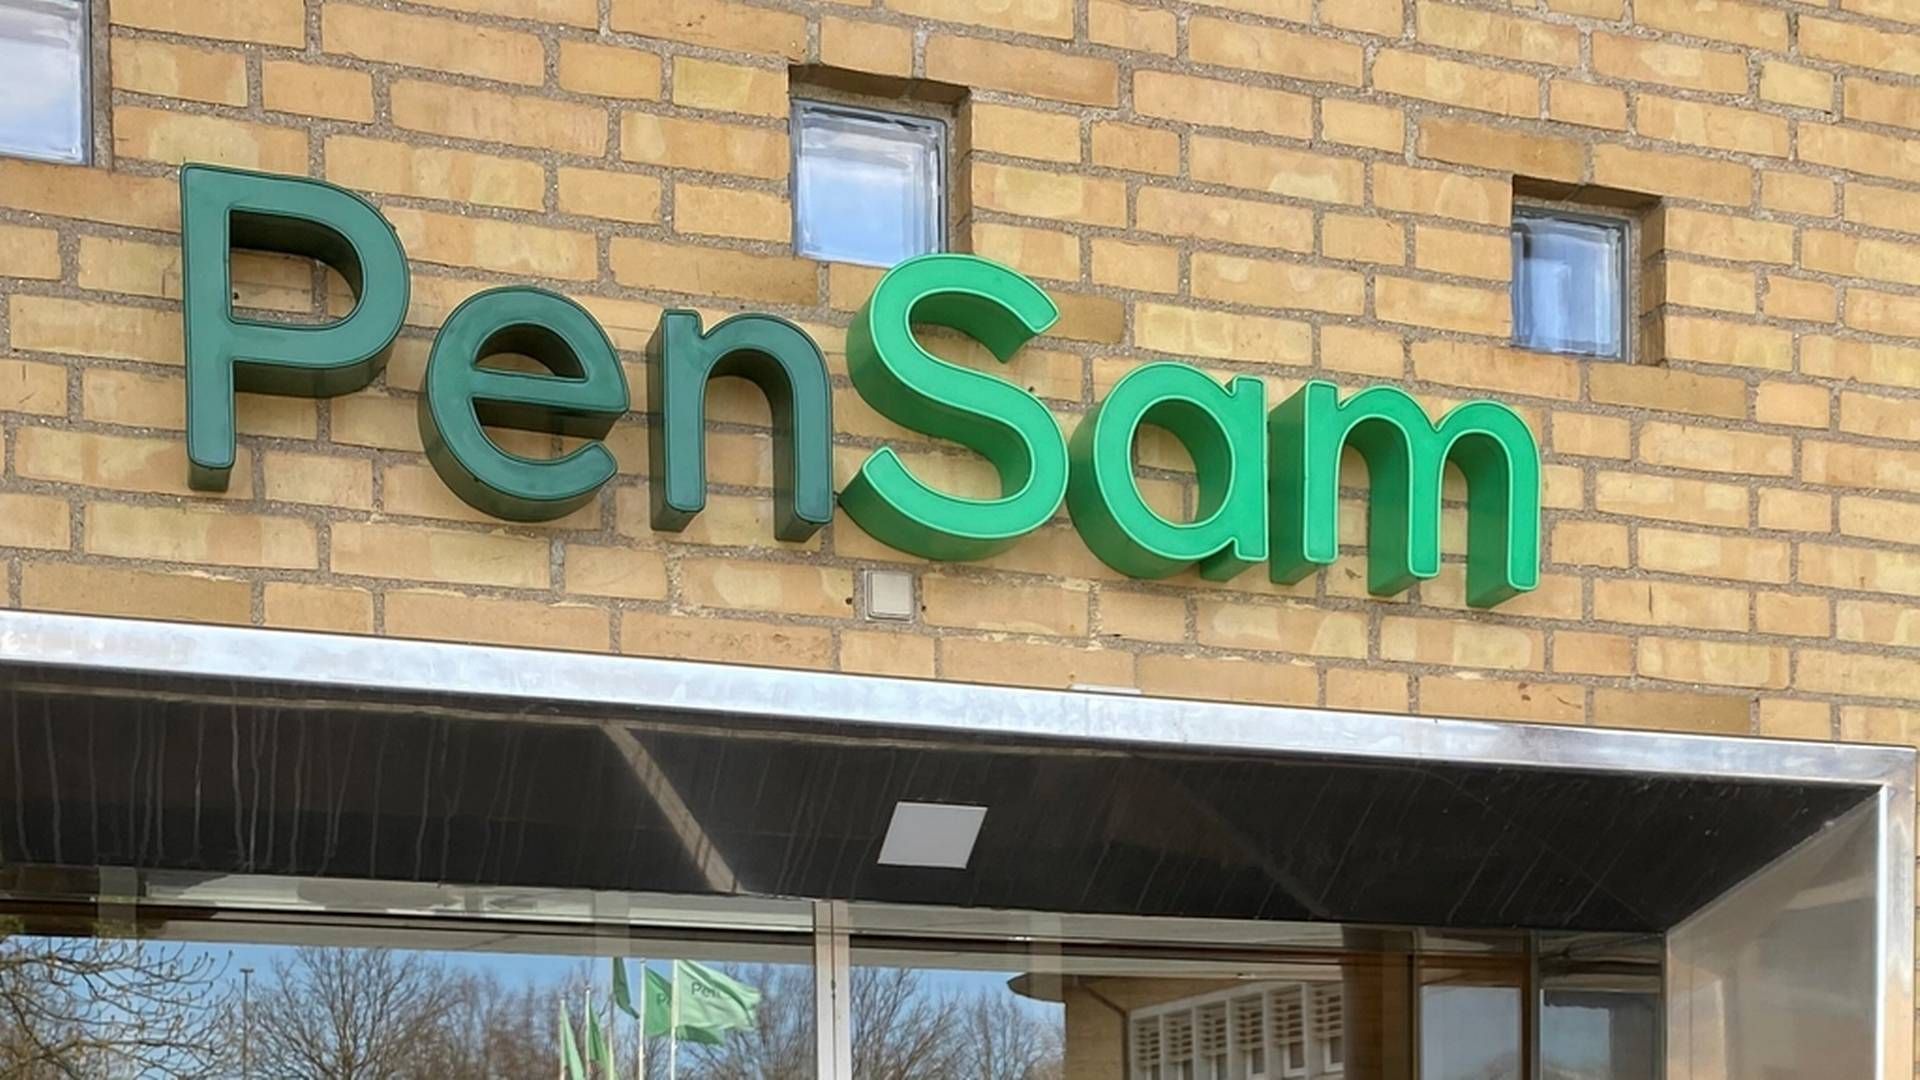 Danish Pensam is one of the ten pension funds that have or have recently had money in an Indian conglomerate accused of improper trading. | Photo: PR/ Pensam Bank